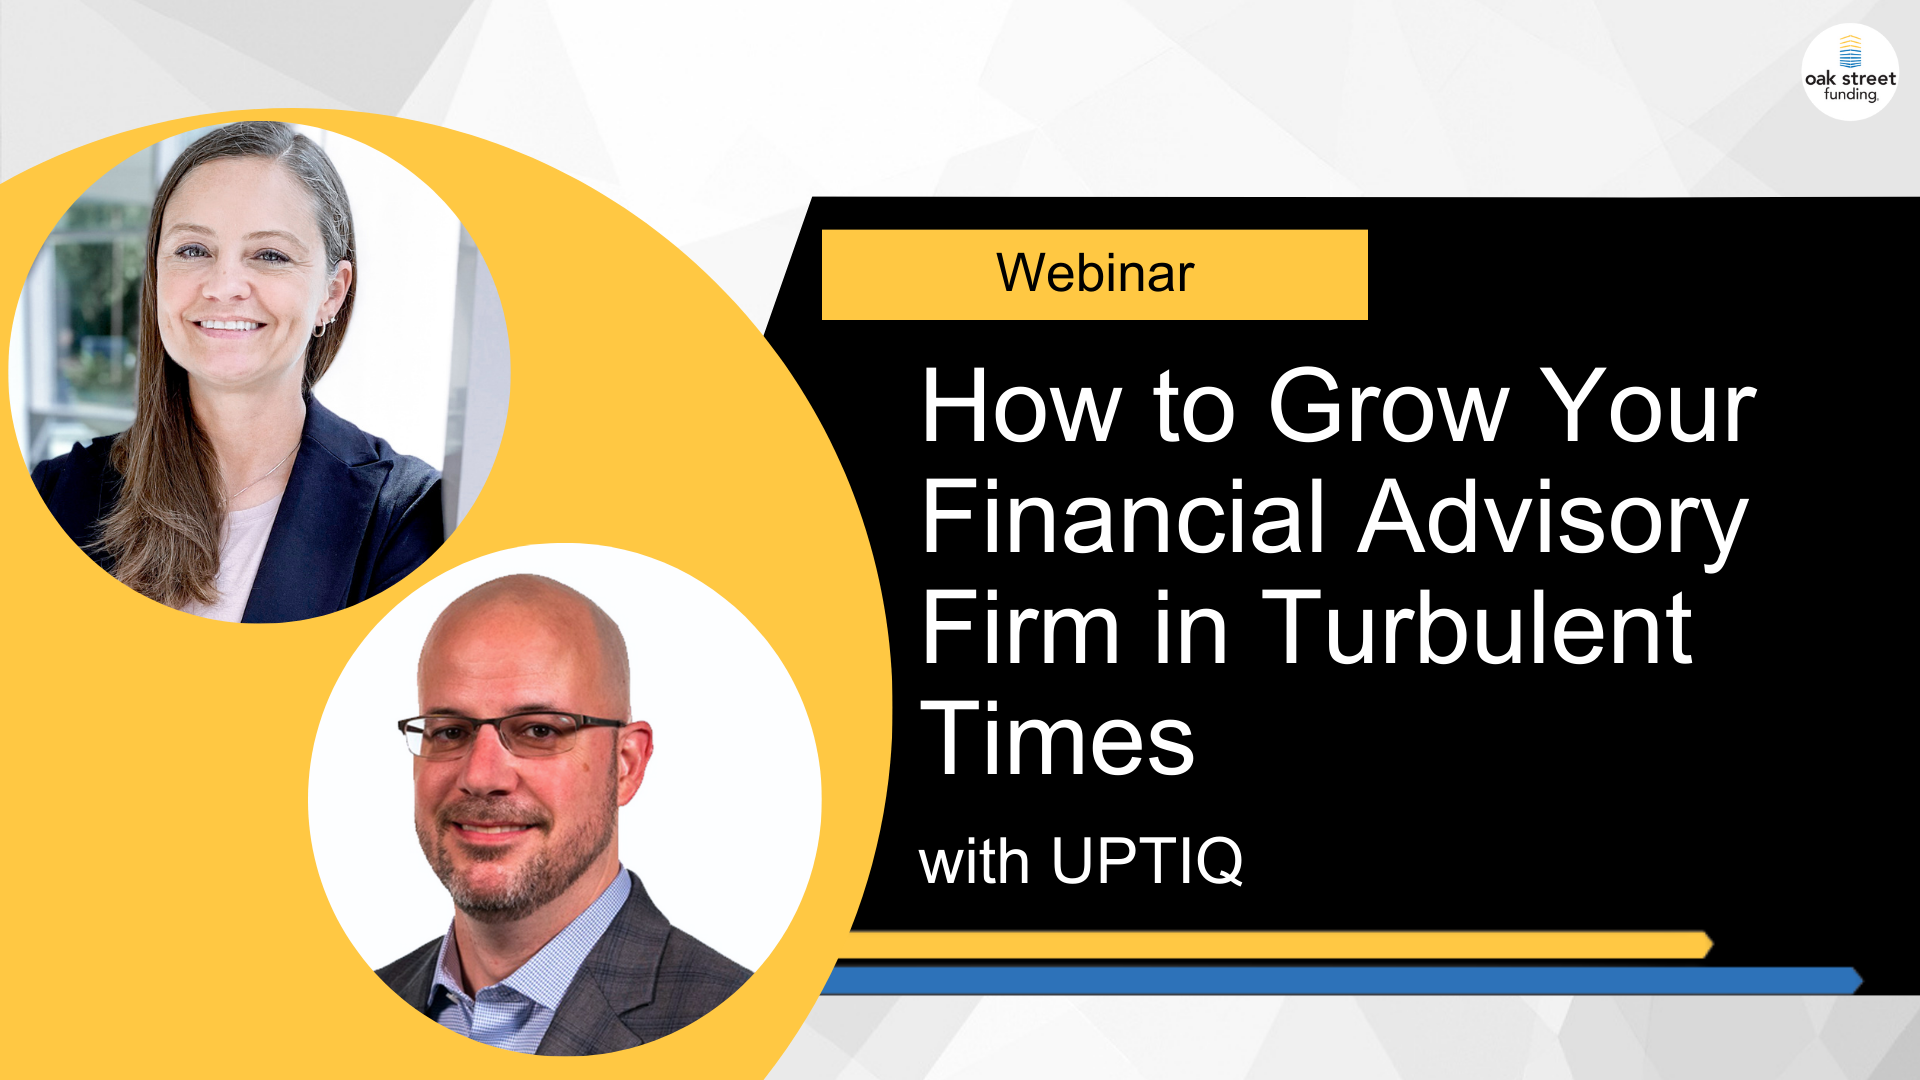 How To Grow Your Financial Advisory Firm in Turbulent Times